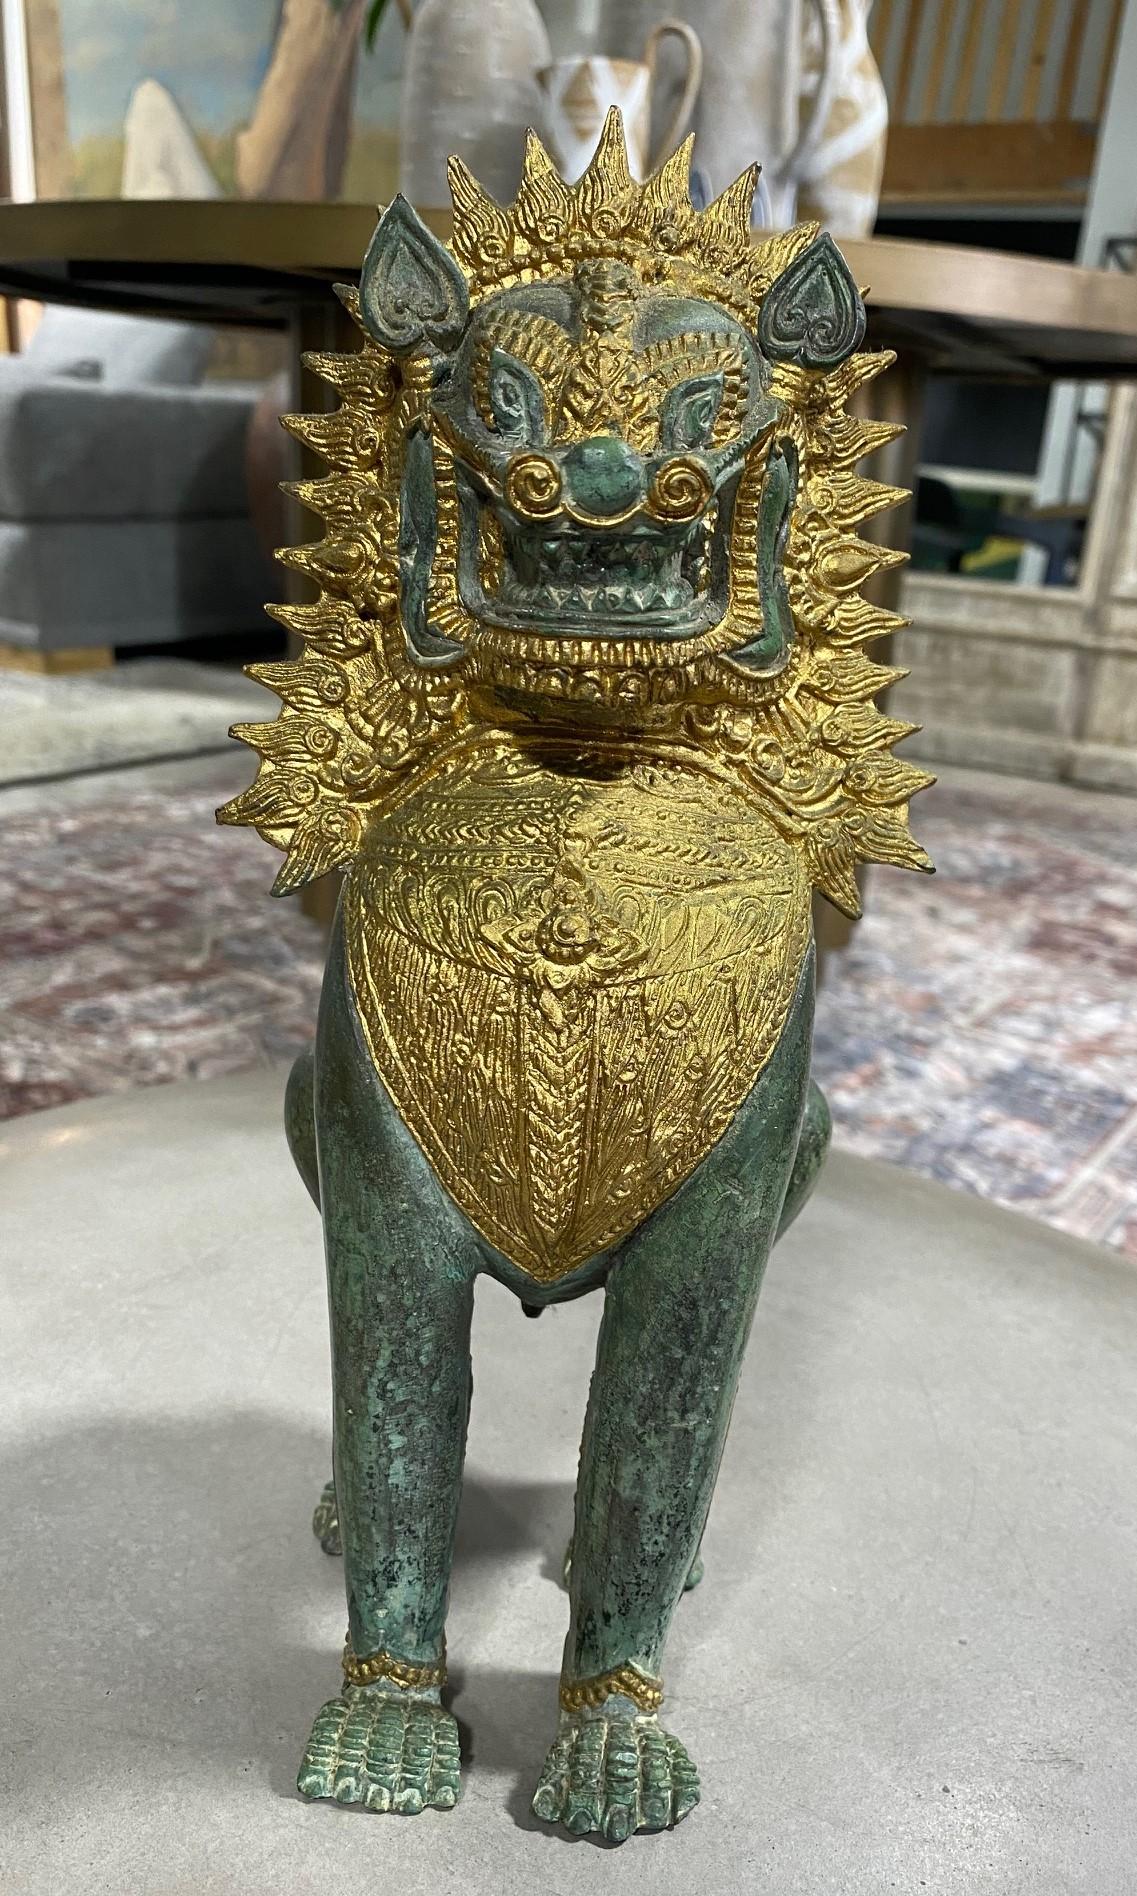 A beautiful Thai or Khmer bronze verdigris and golden parcel-gilt Imperial guardian temple Singha lion/dragon/foo dog. This piece has a wonderful patina and heft to it. 

Likely mid to late 20th century but perhaps older. 

Would be a great